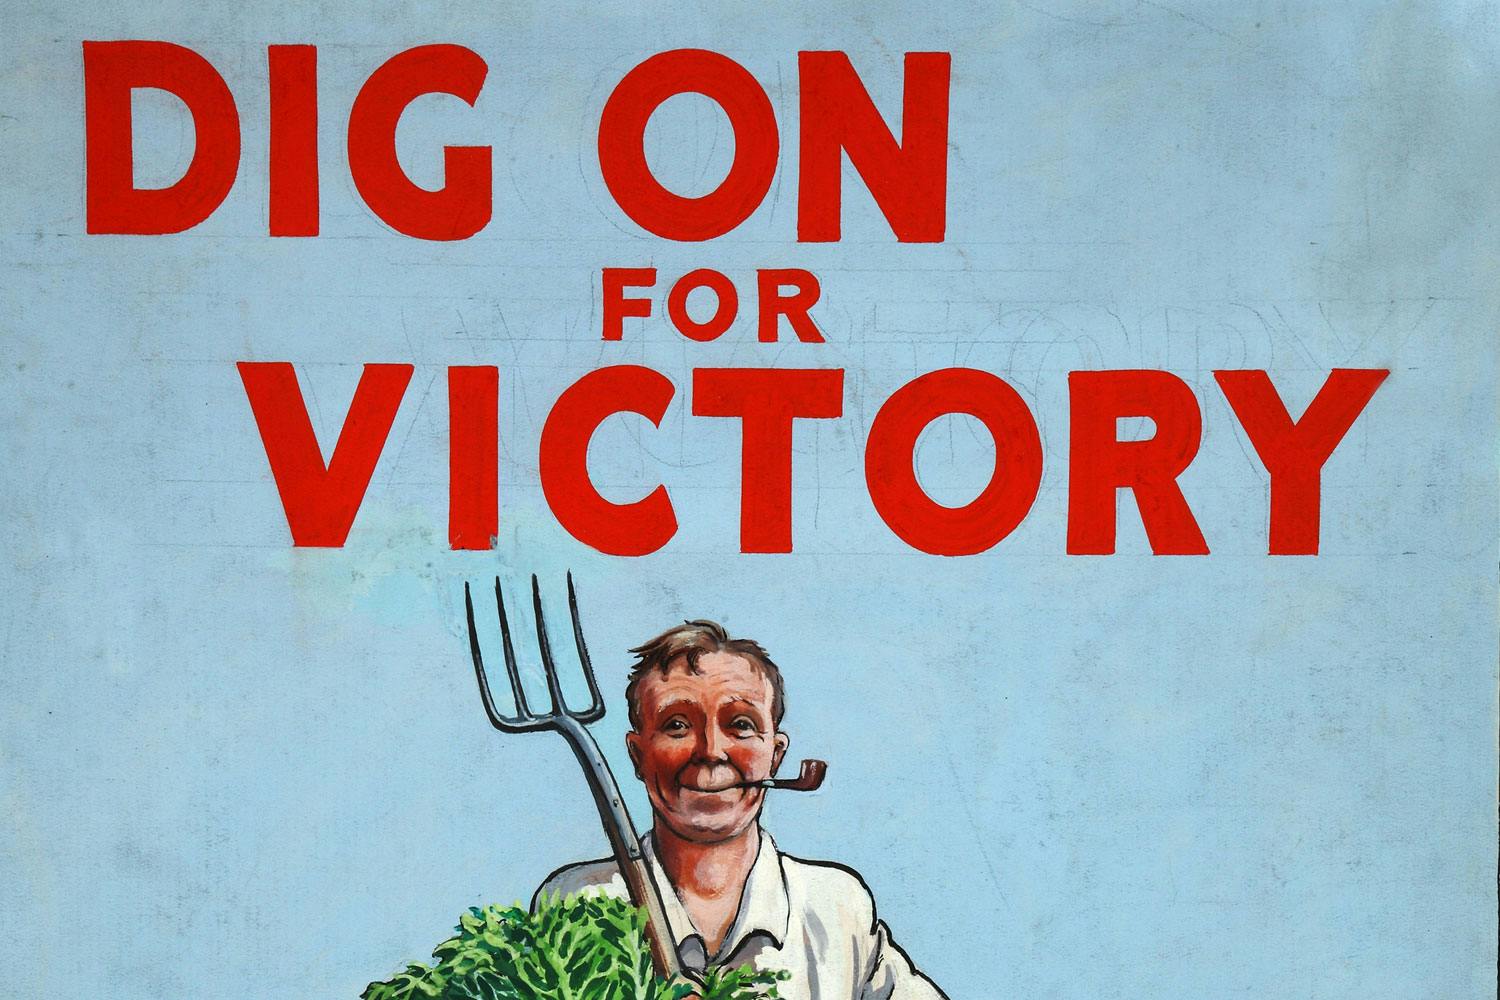 Key text: "Dig on for victory"